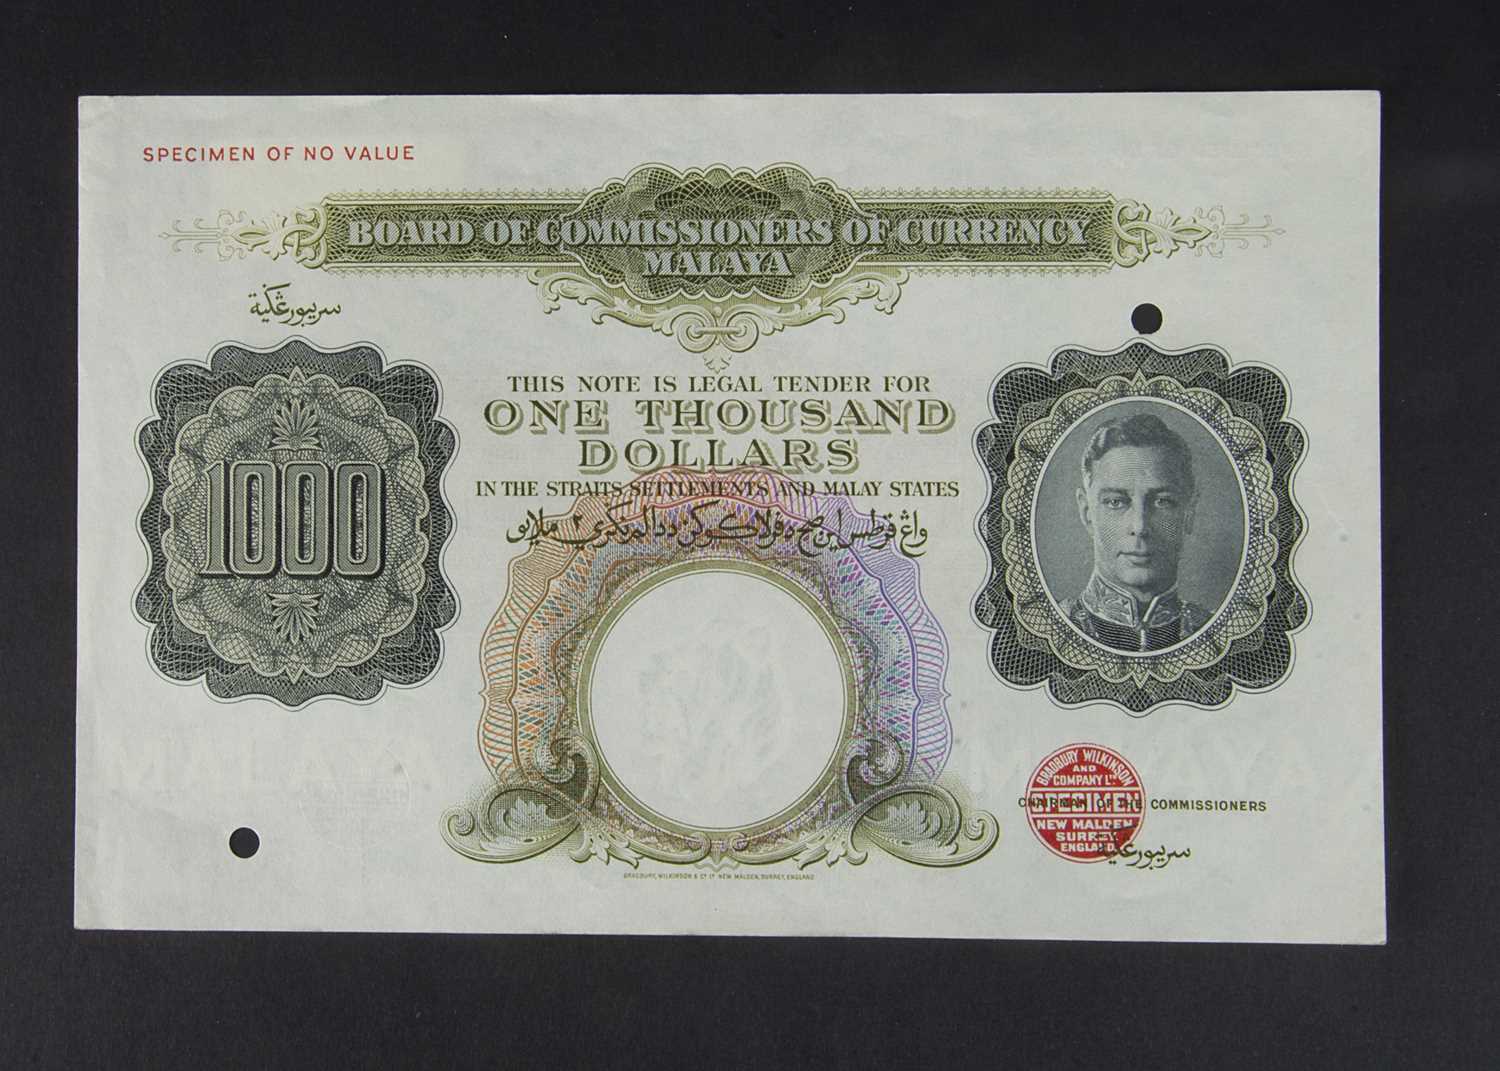 Specimen Bank Note: Board of Commissioners of Currency, Malaya specimen 1000 Dollars,